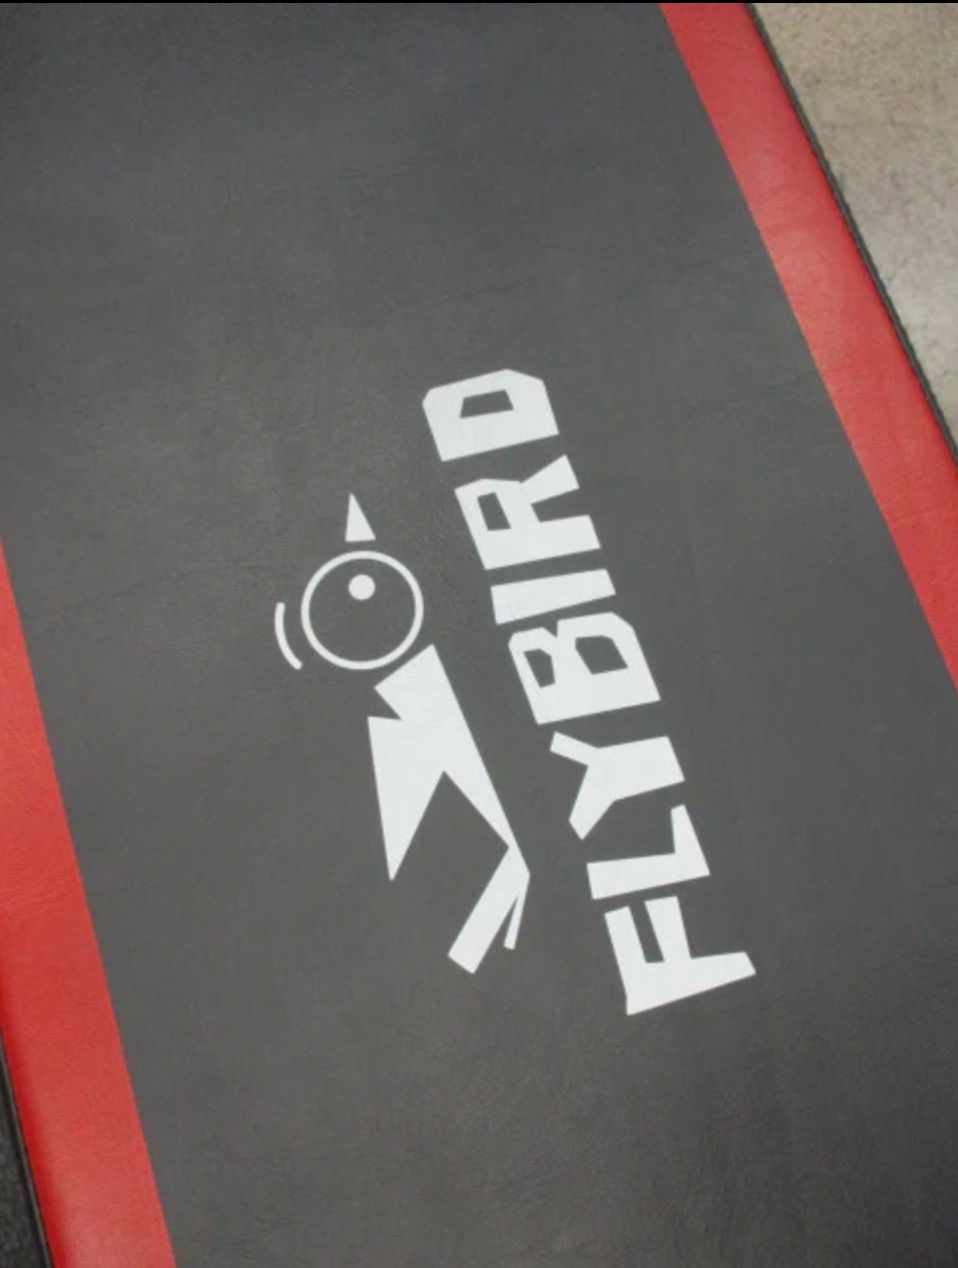 Used Flybird Fold Flat Weight Bench - 1000lb weight capacity SKU55025-1